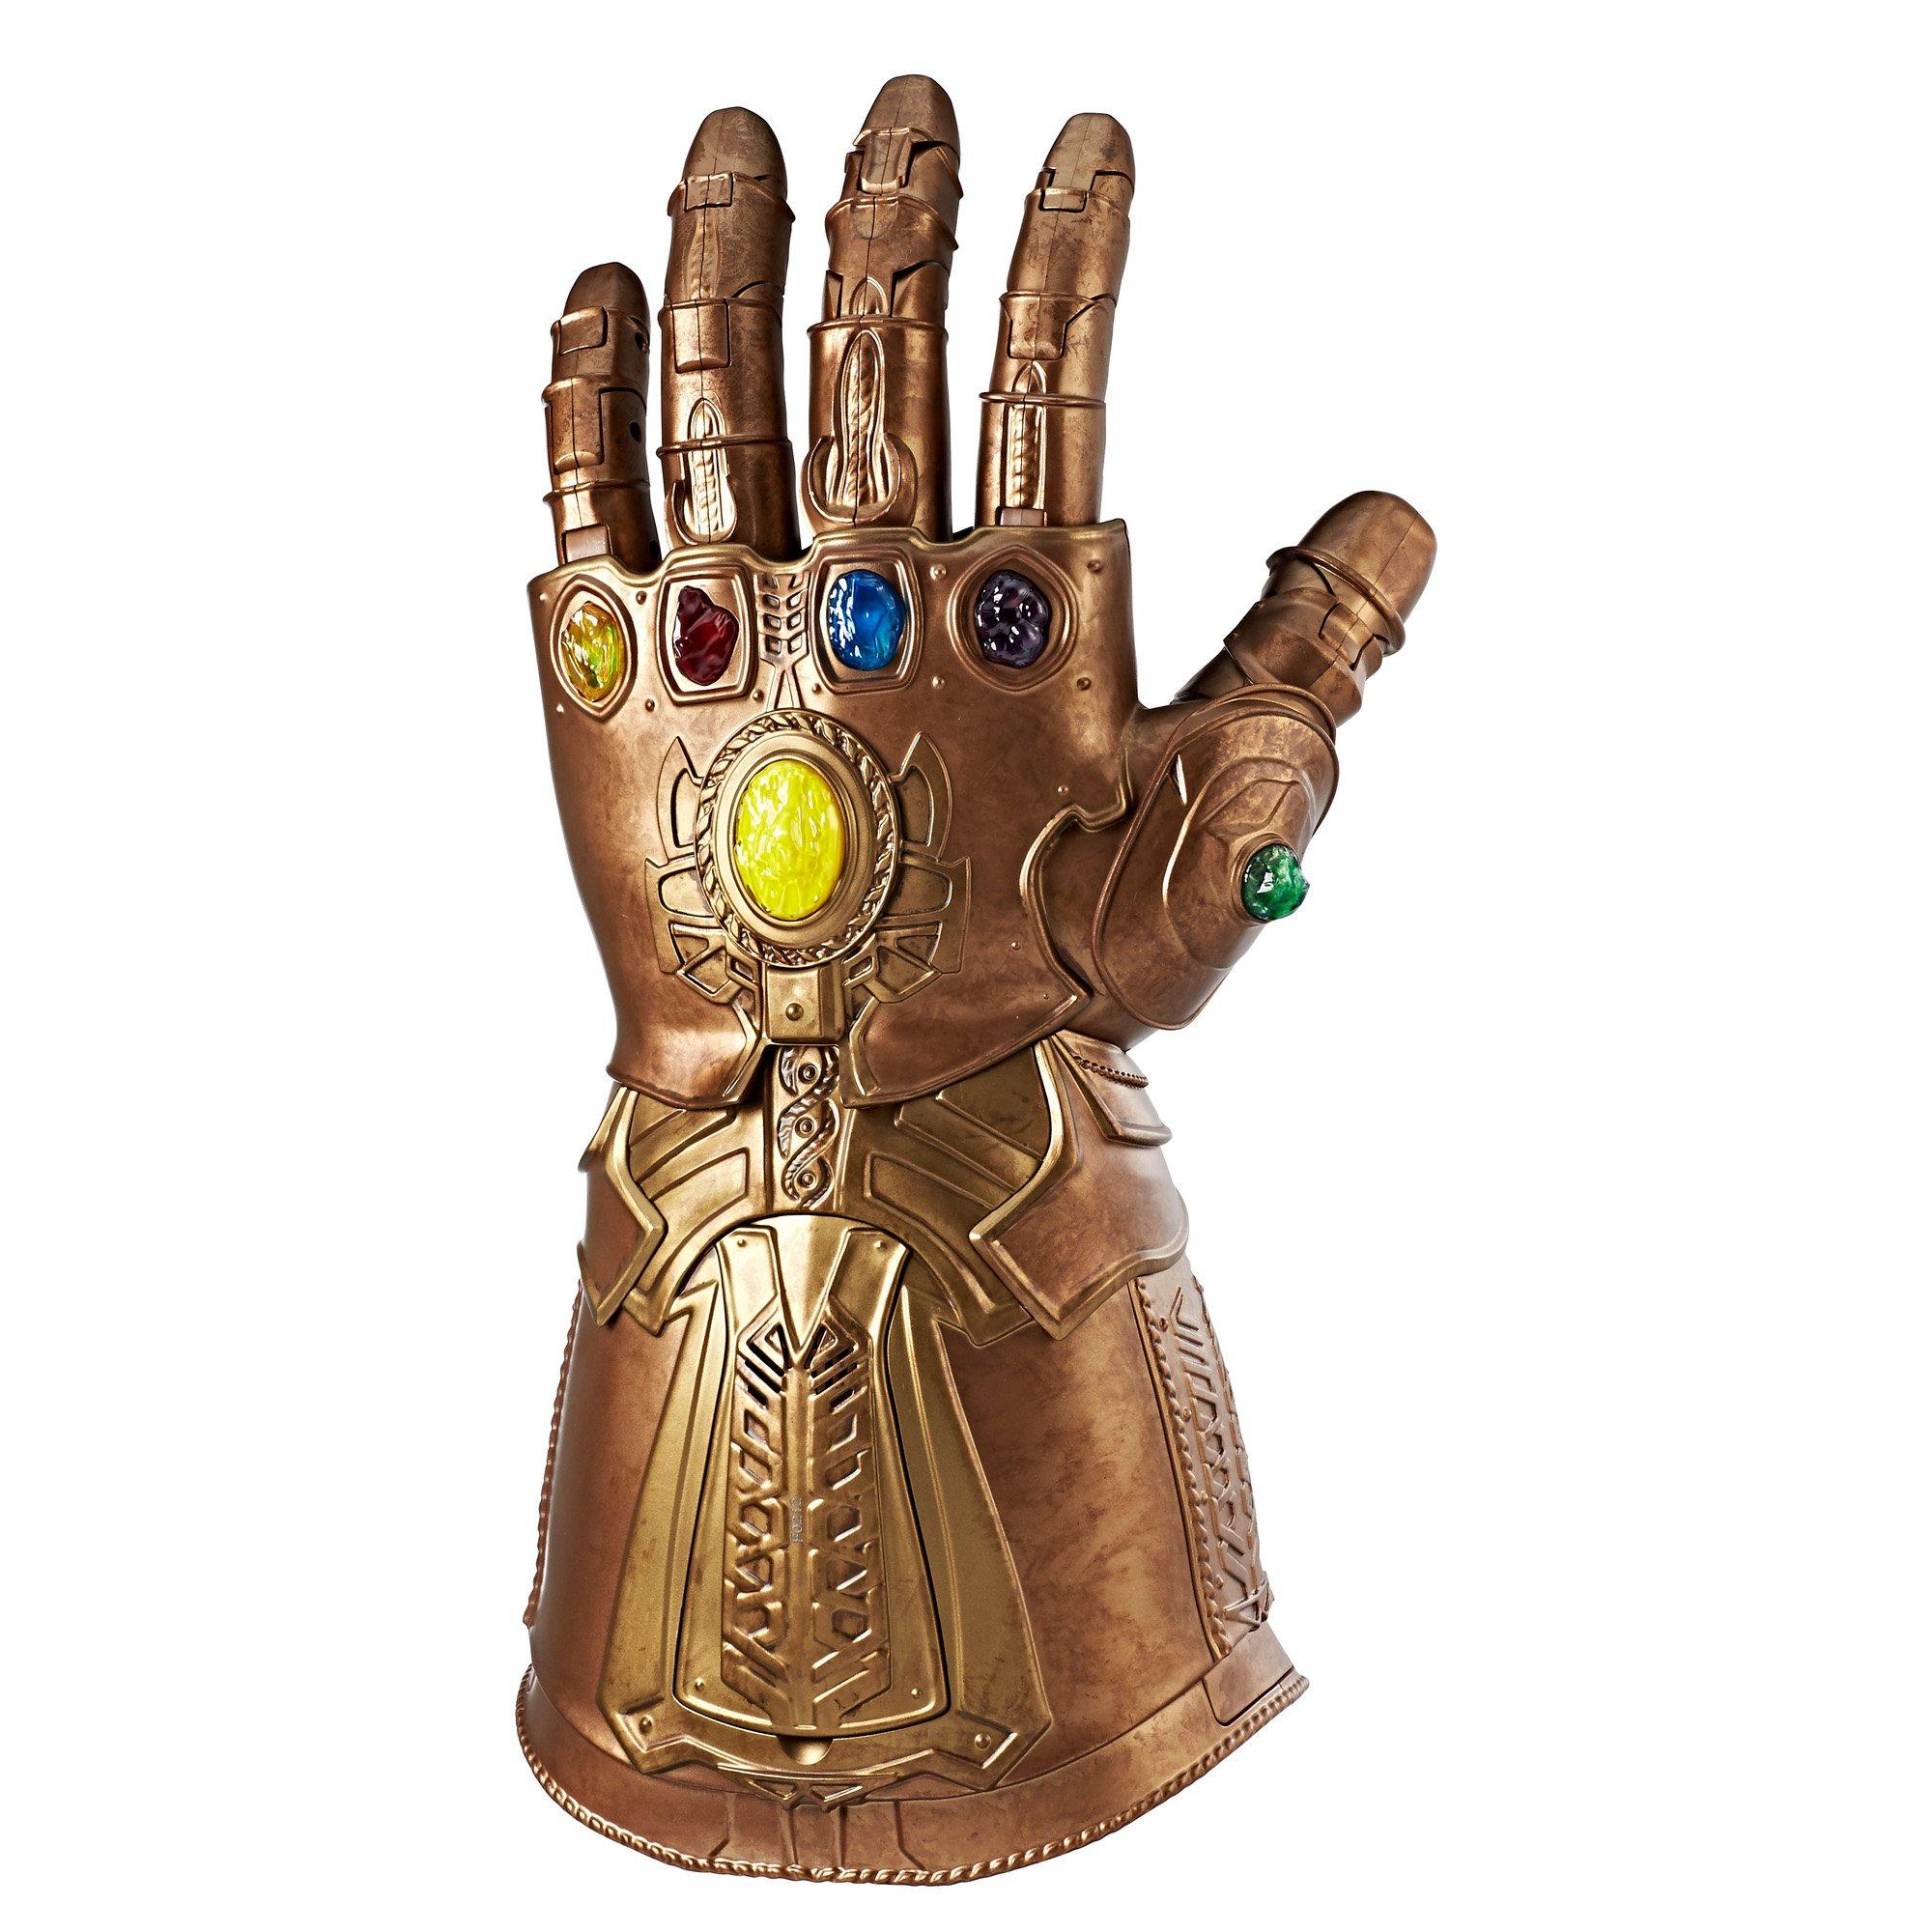 Thanos Infinity Gauntlet Is What Roblox Heroes Free Roblox Clothing Templates - roblox heroes online how to get infinity stones